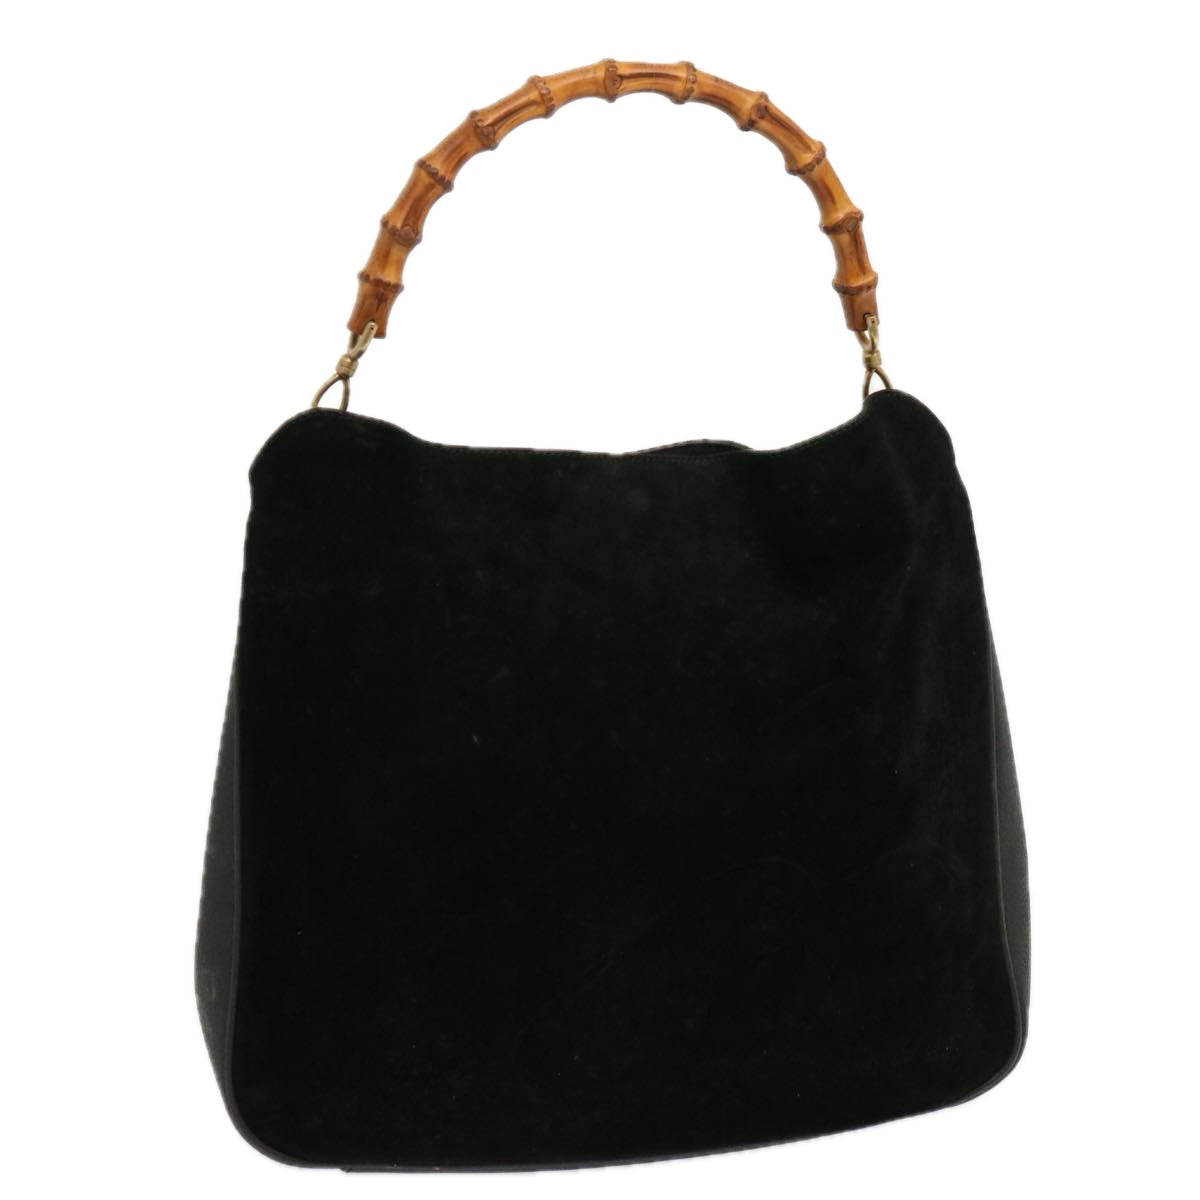 GUCCI Bamboo Hand Bag Suede Black 001 1998 1577 Auth bs13101